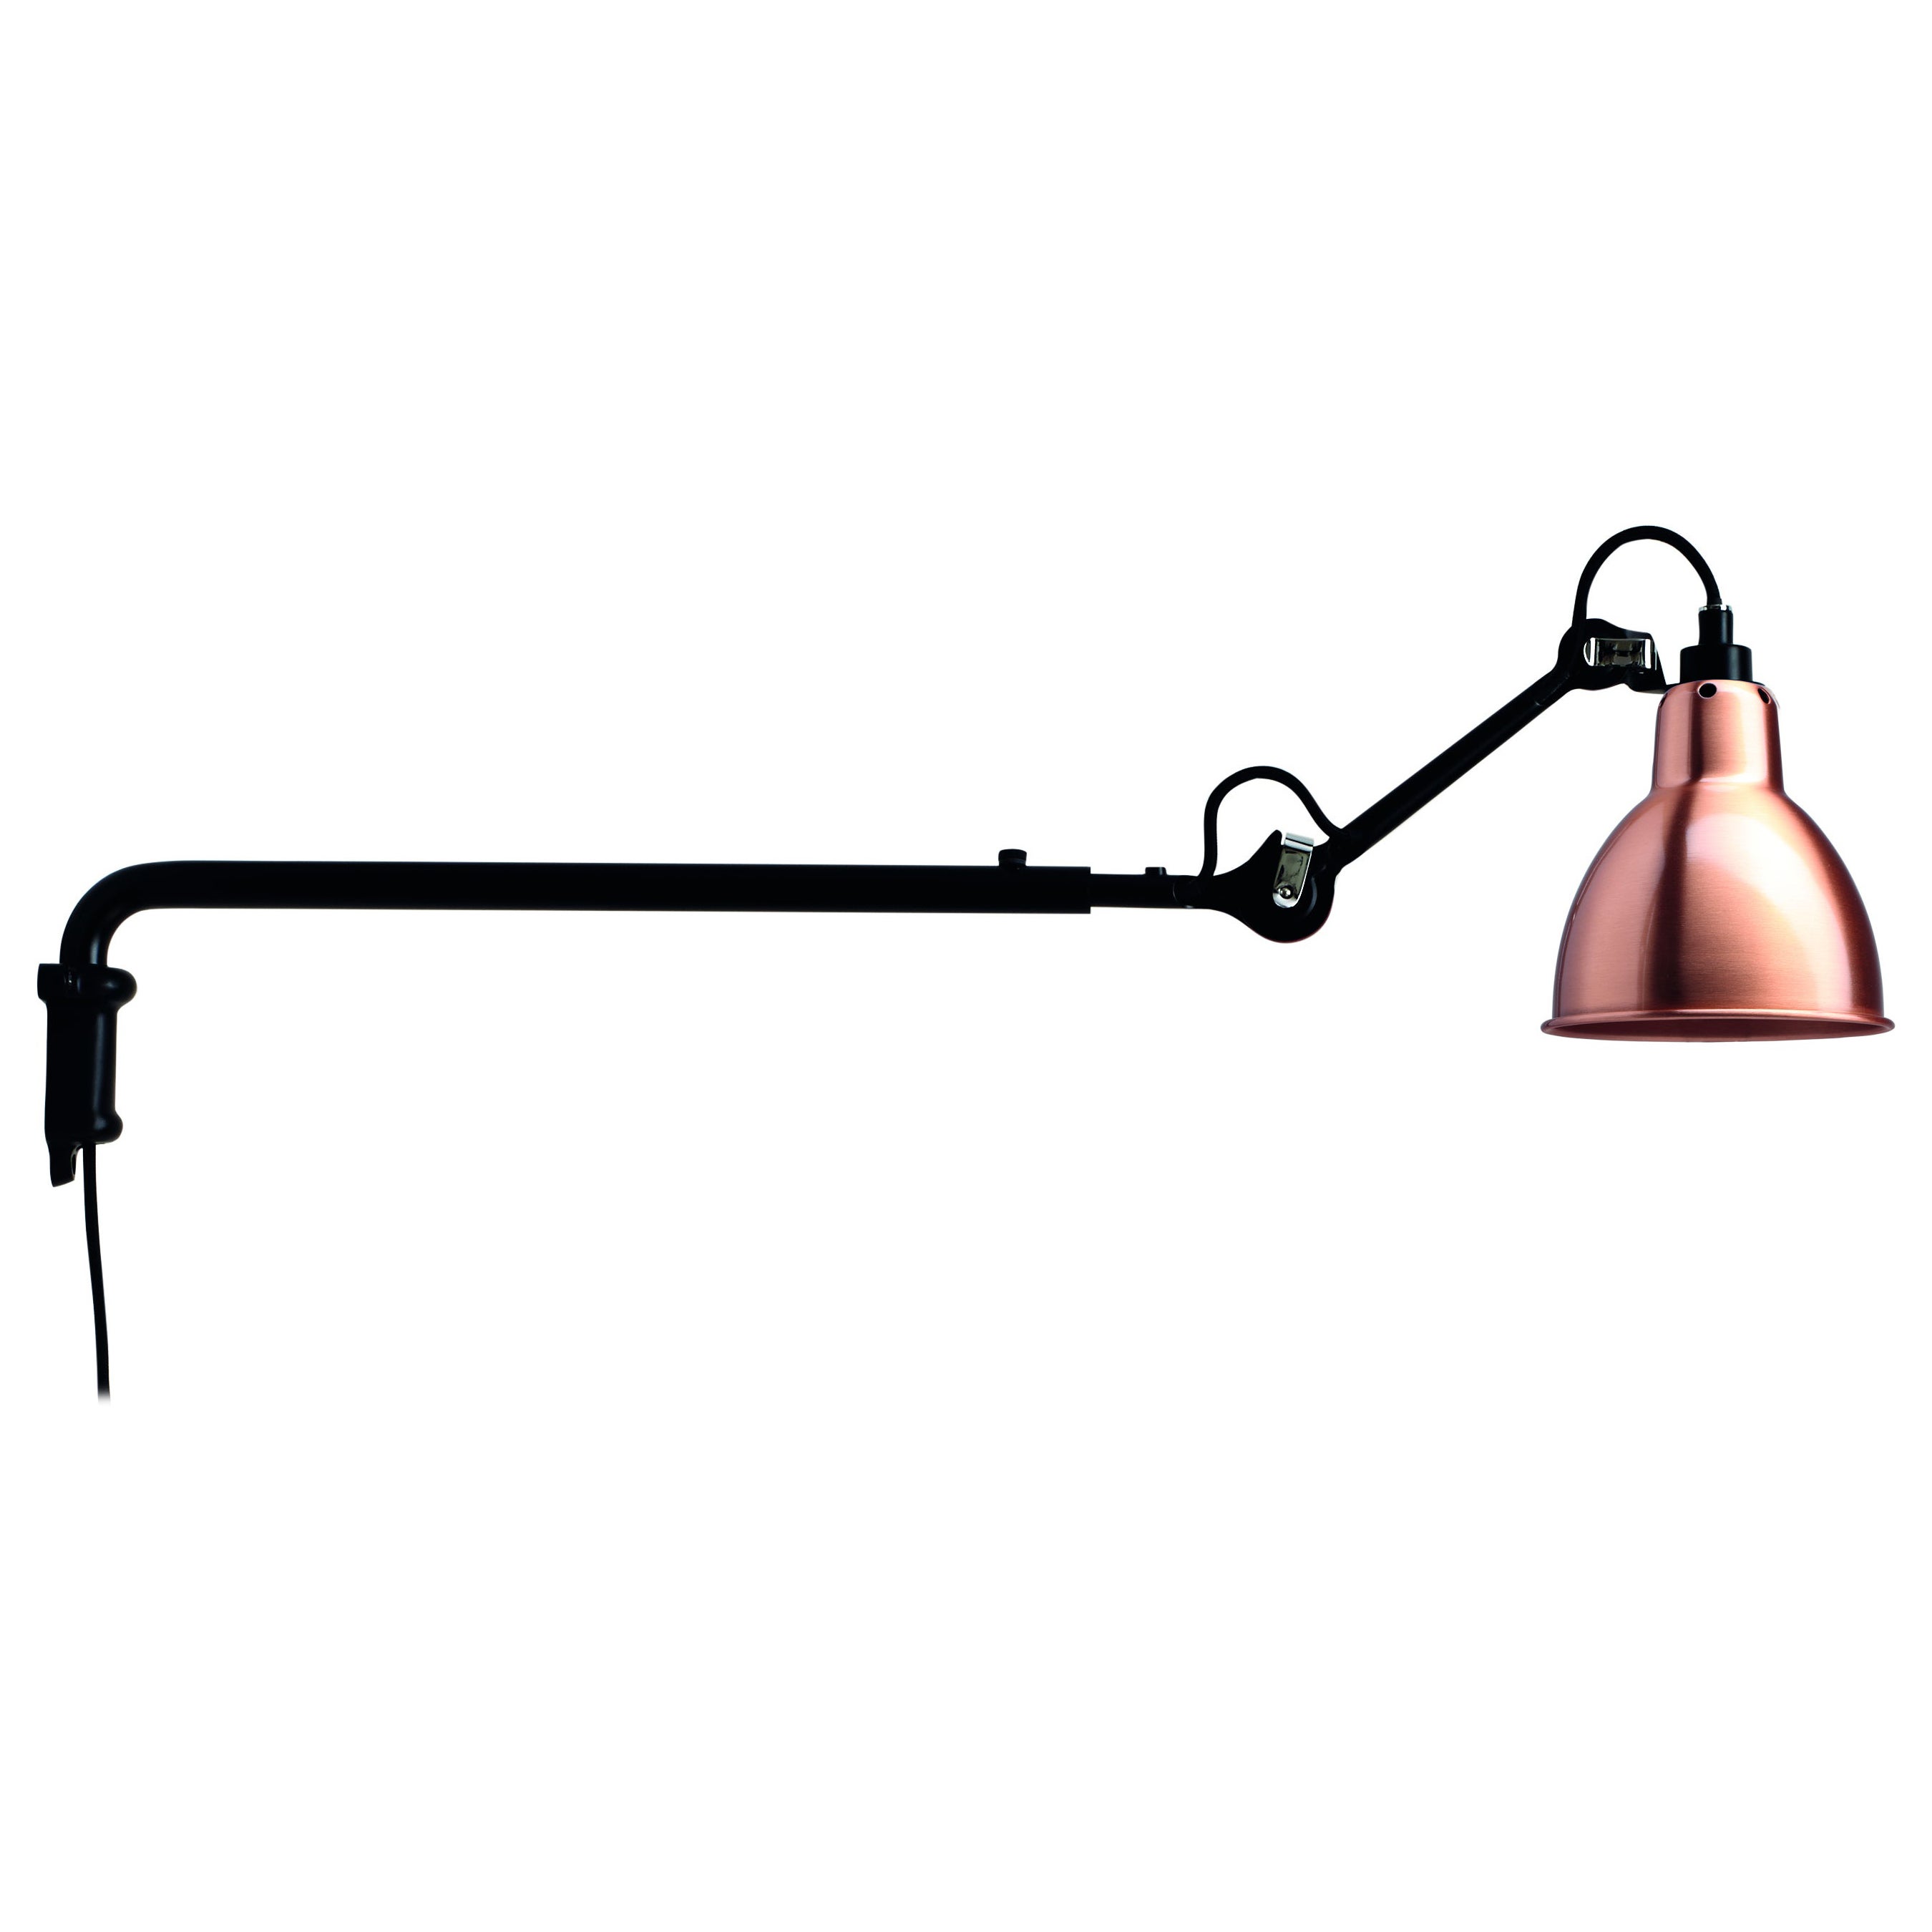 DCW Editions La Lampe Gras N°203 Wall Lamp in Black Arm & Black Copper Shade For Sale